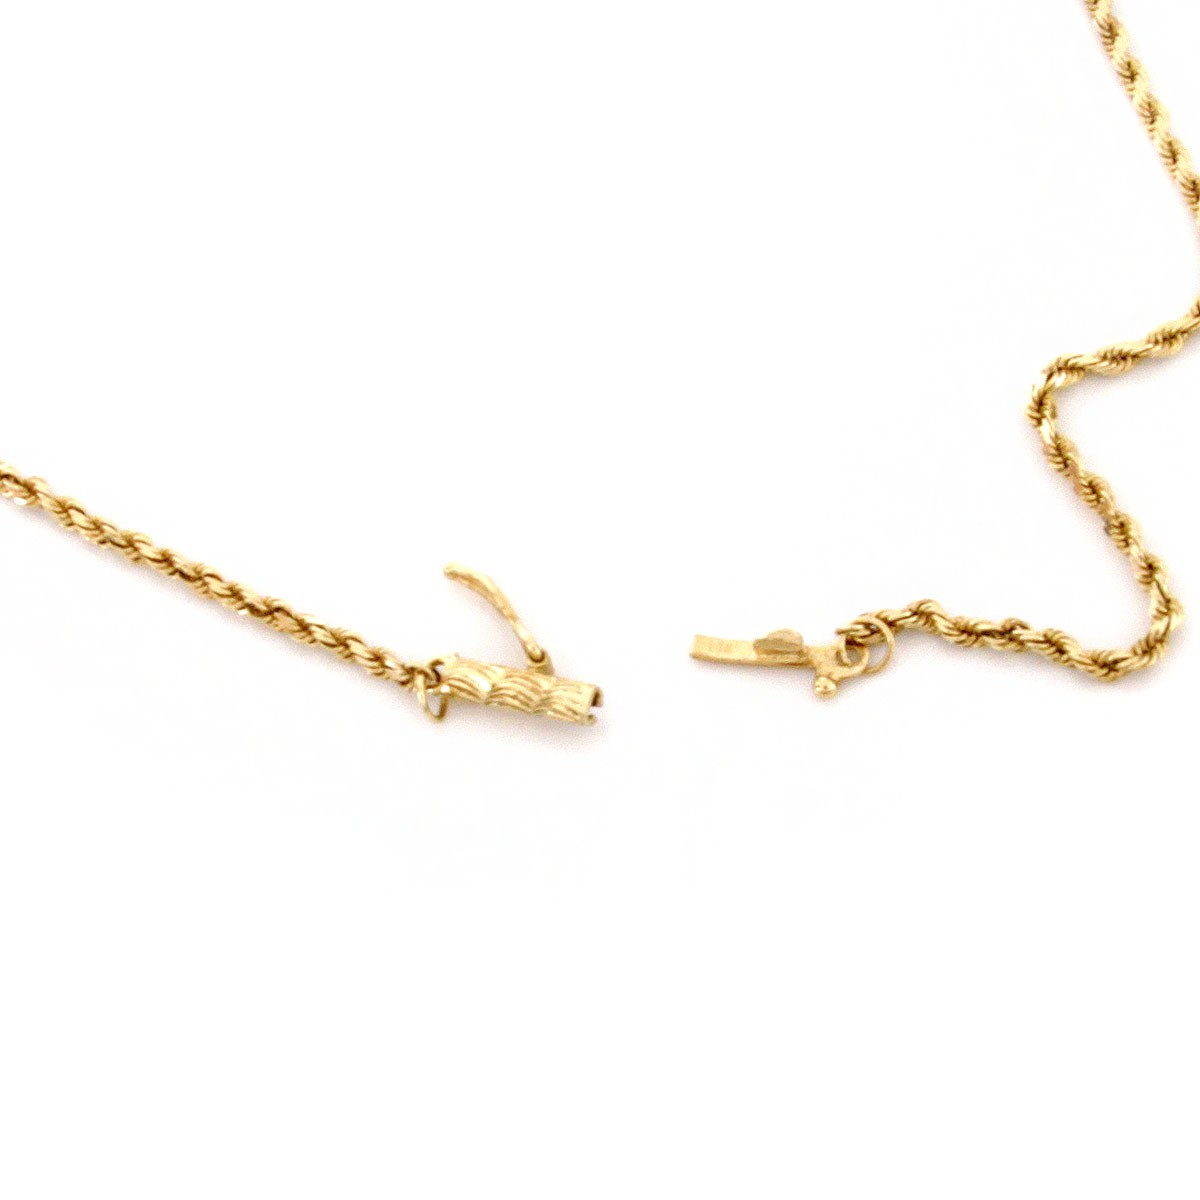 Diamond and 14K Gold Cat Pendant Necklace